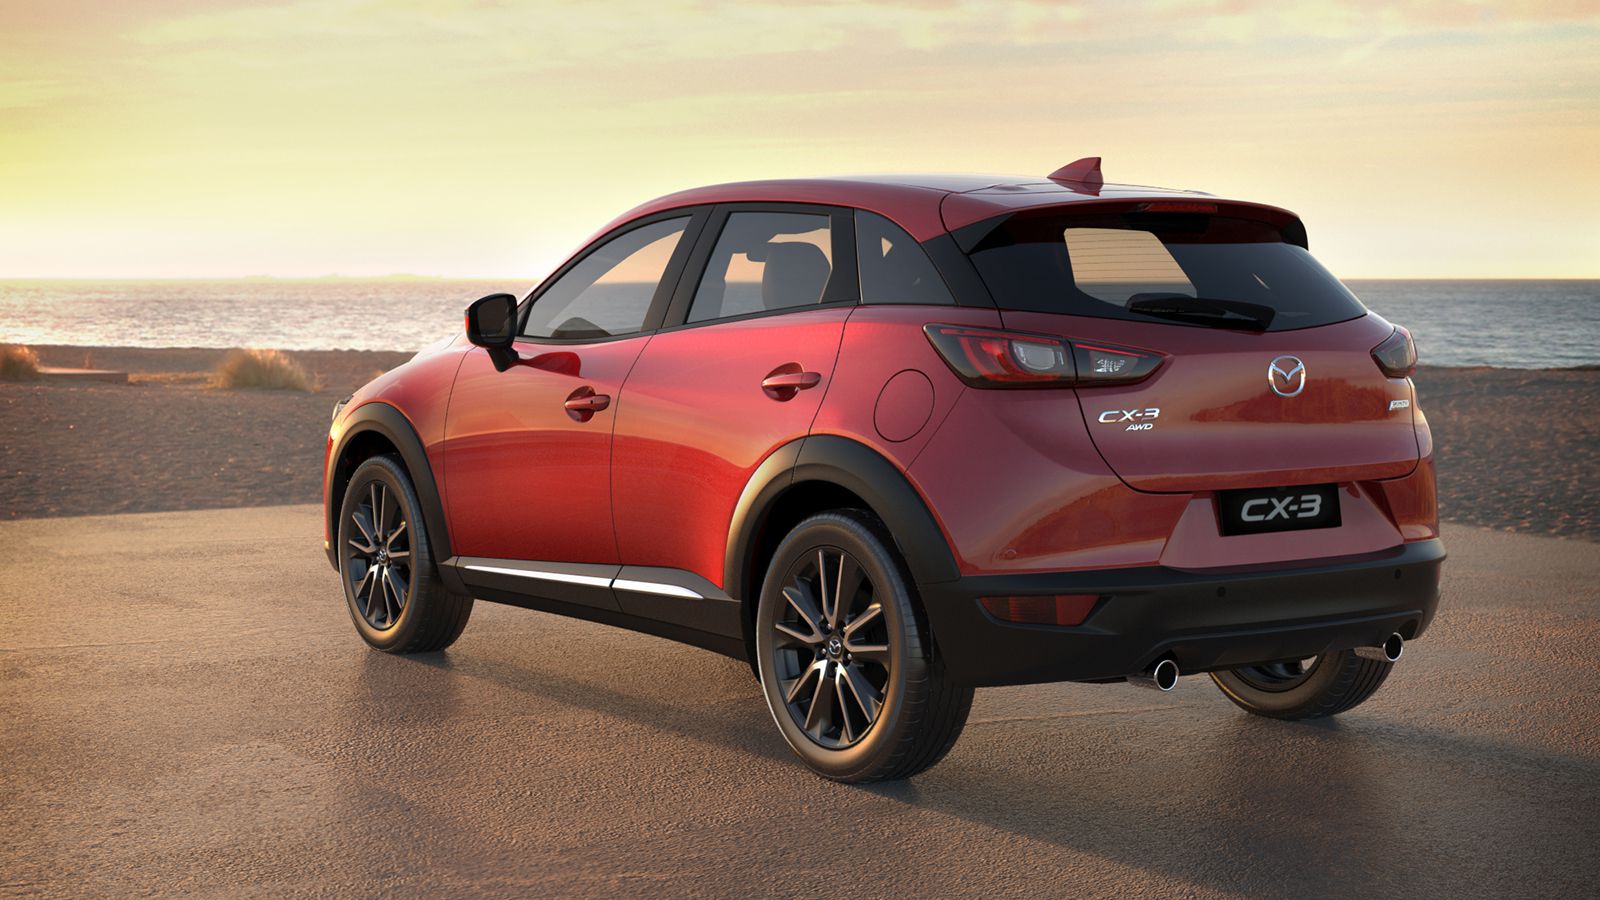 Amazing Mazda CX-3 Pictures & Backgrounds